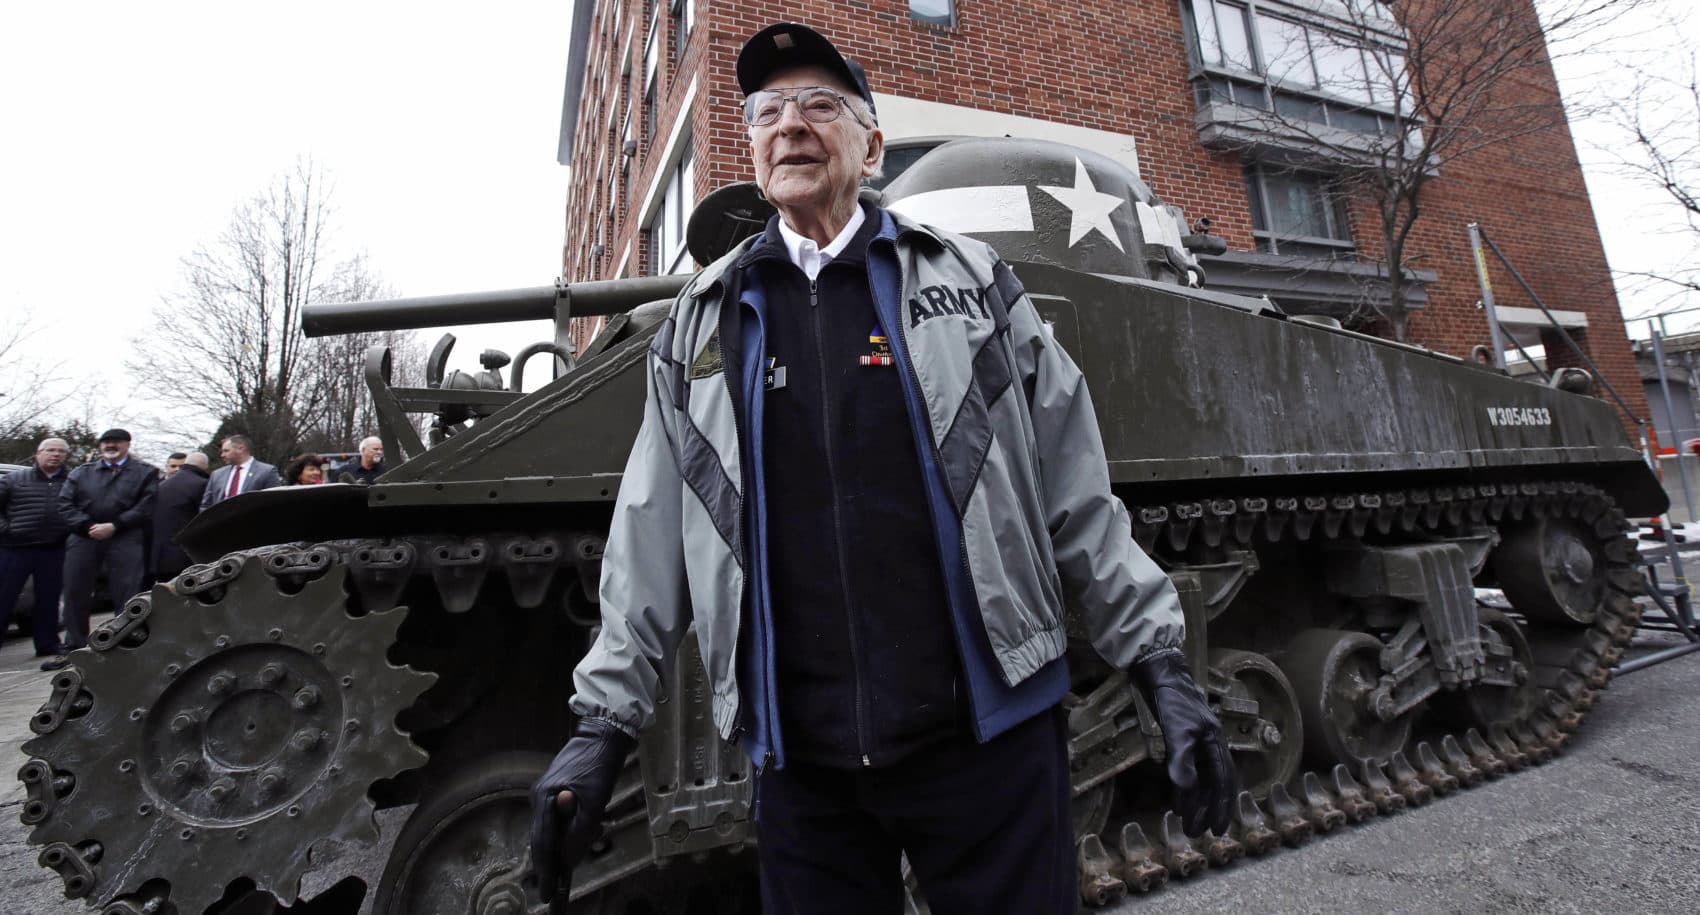 World War II tank gunner Clarence Smoyer poses for a portrait near the Charlestown Naval Shipyard in Boston, Feb. 20, 2019. The 95-year-old veteran was surprised with a ride through the streets of Boston in a Sherman tank, one of the tanks most widely used by the U.S. during the war. (Charles Krupa/AP)